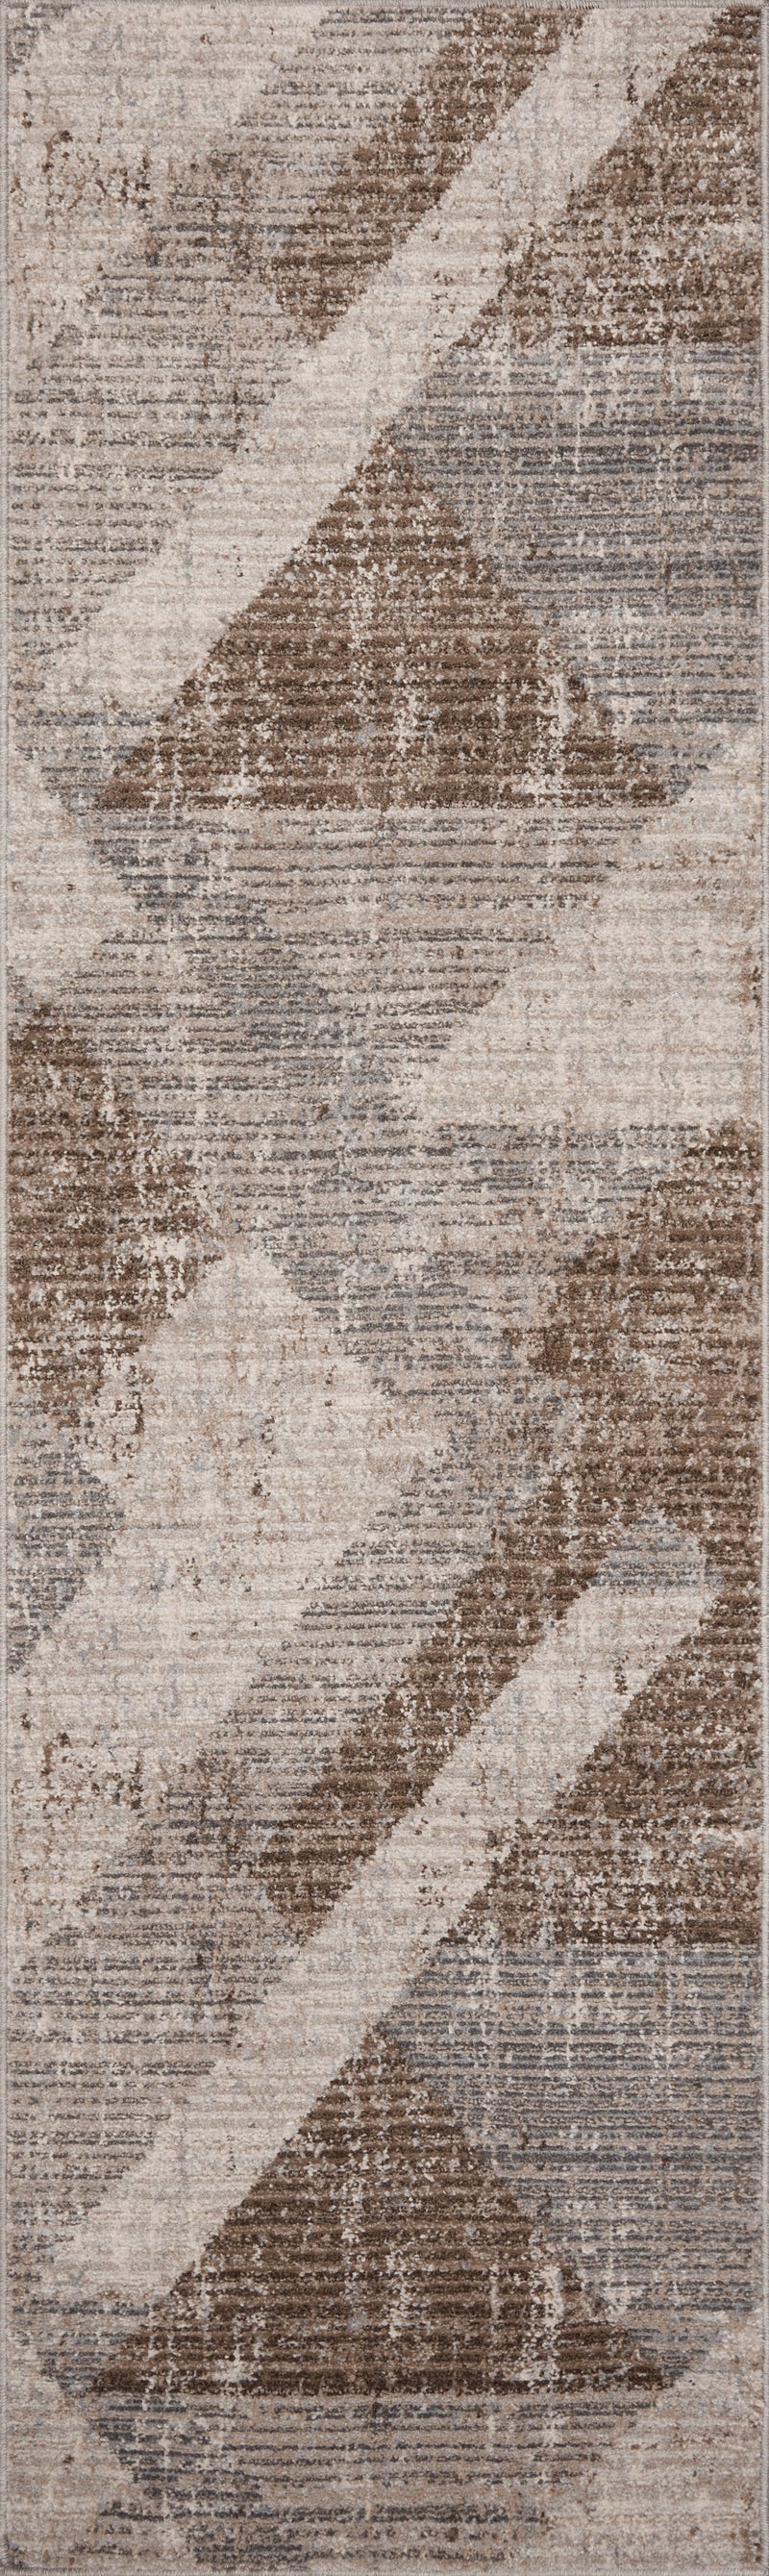 media image for Austen Rug in Stone / Bark by Loloi II 213